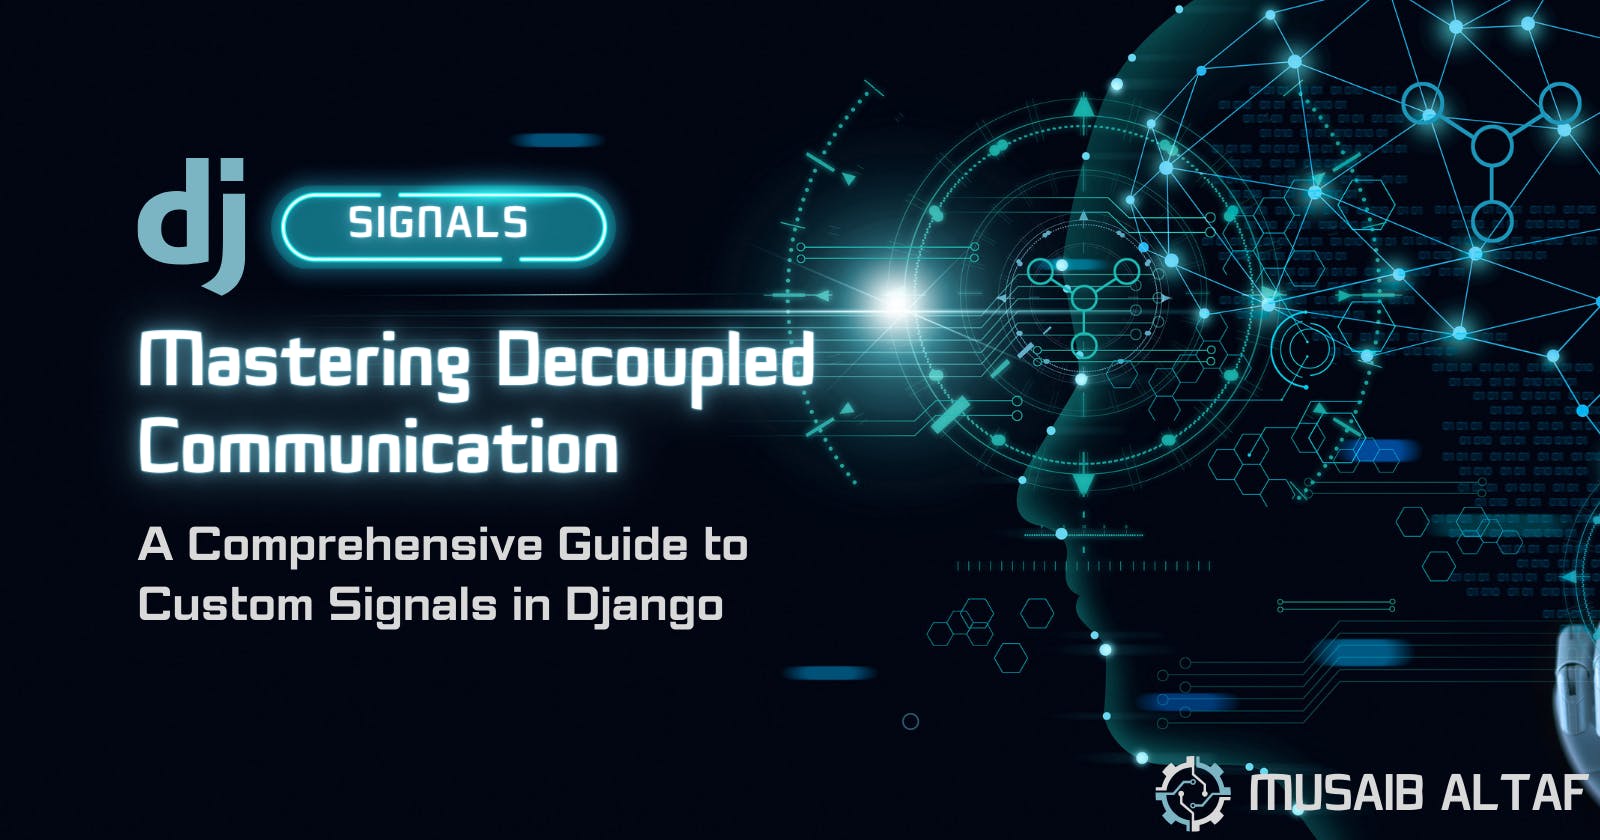 Mastering Decoupled Communication: A Comprehensive Guide to Custom Signals in Django